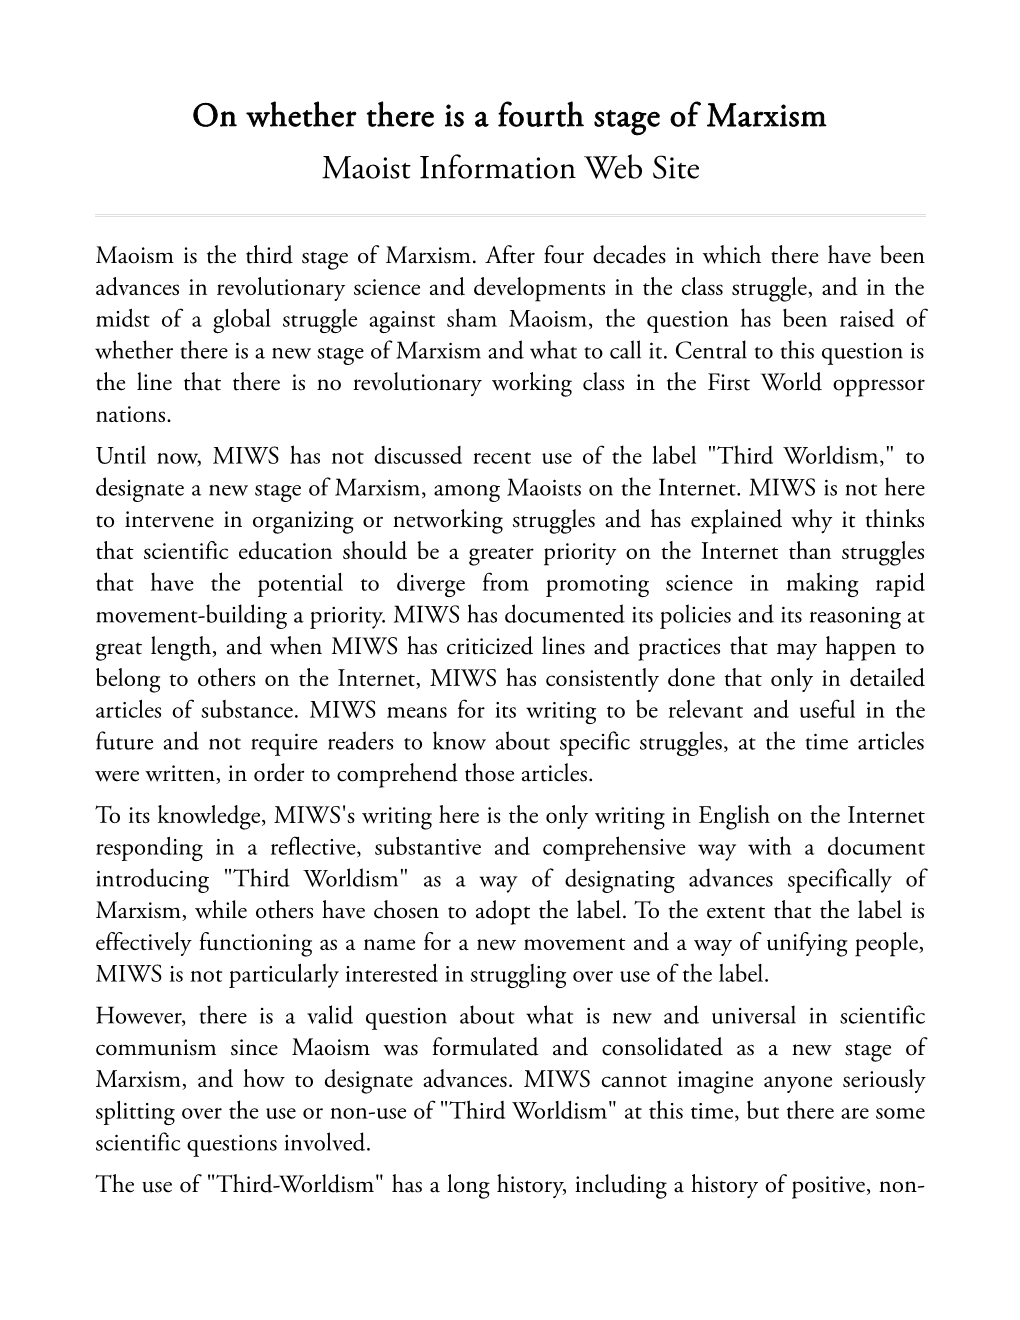 On Whether There Is a Fourth Stage of Marxism Maoist Information Web Site